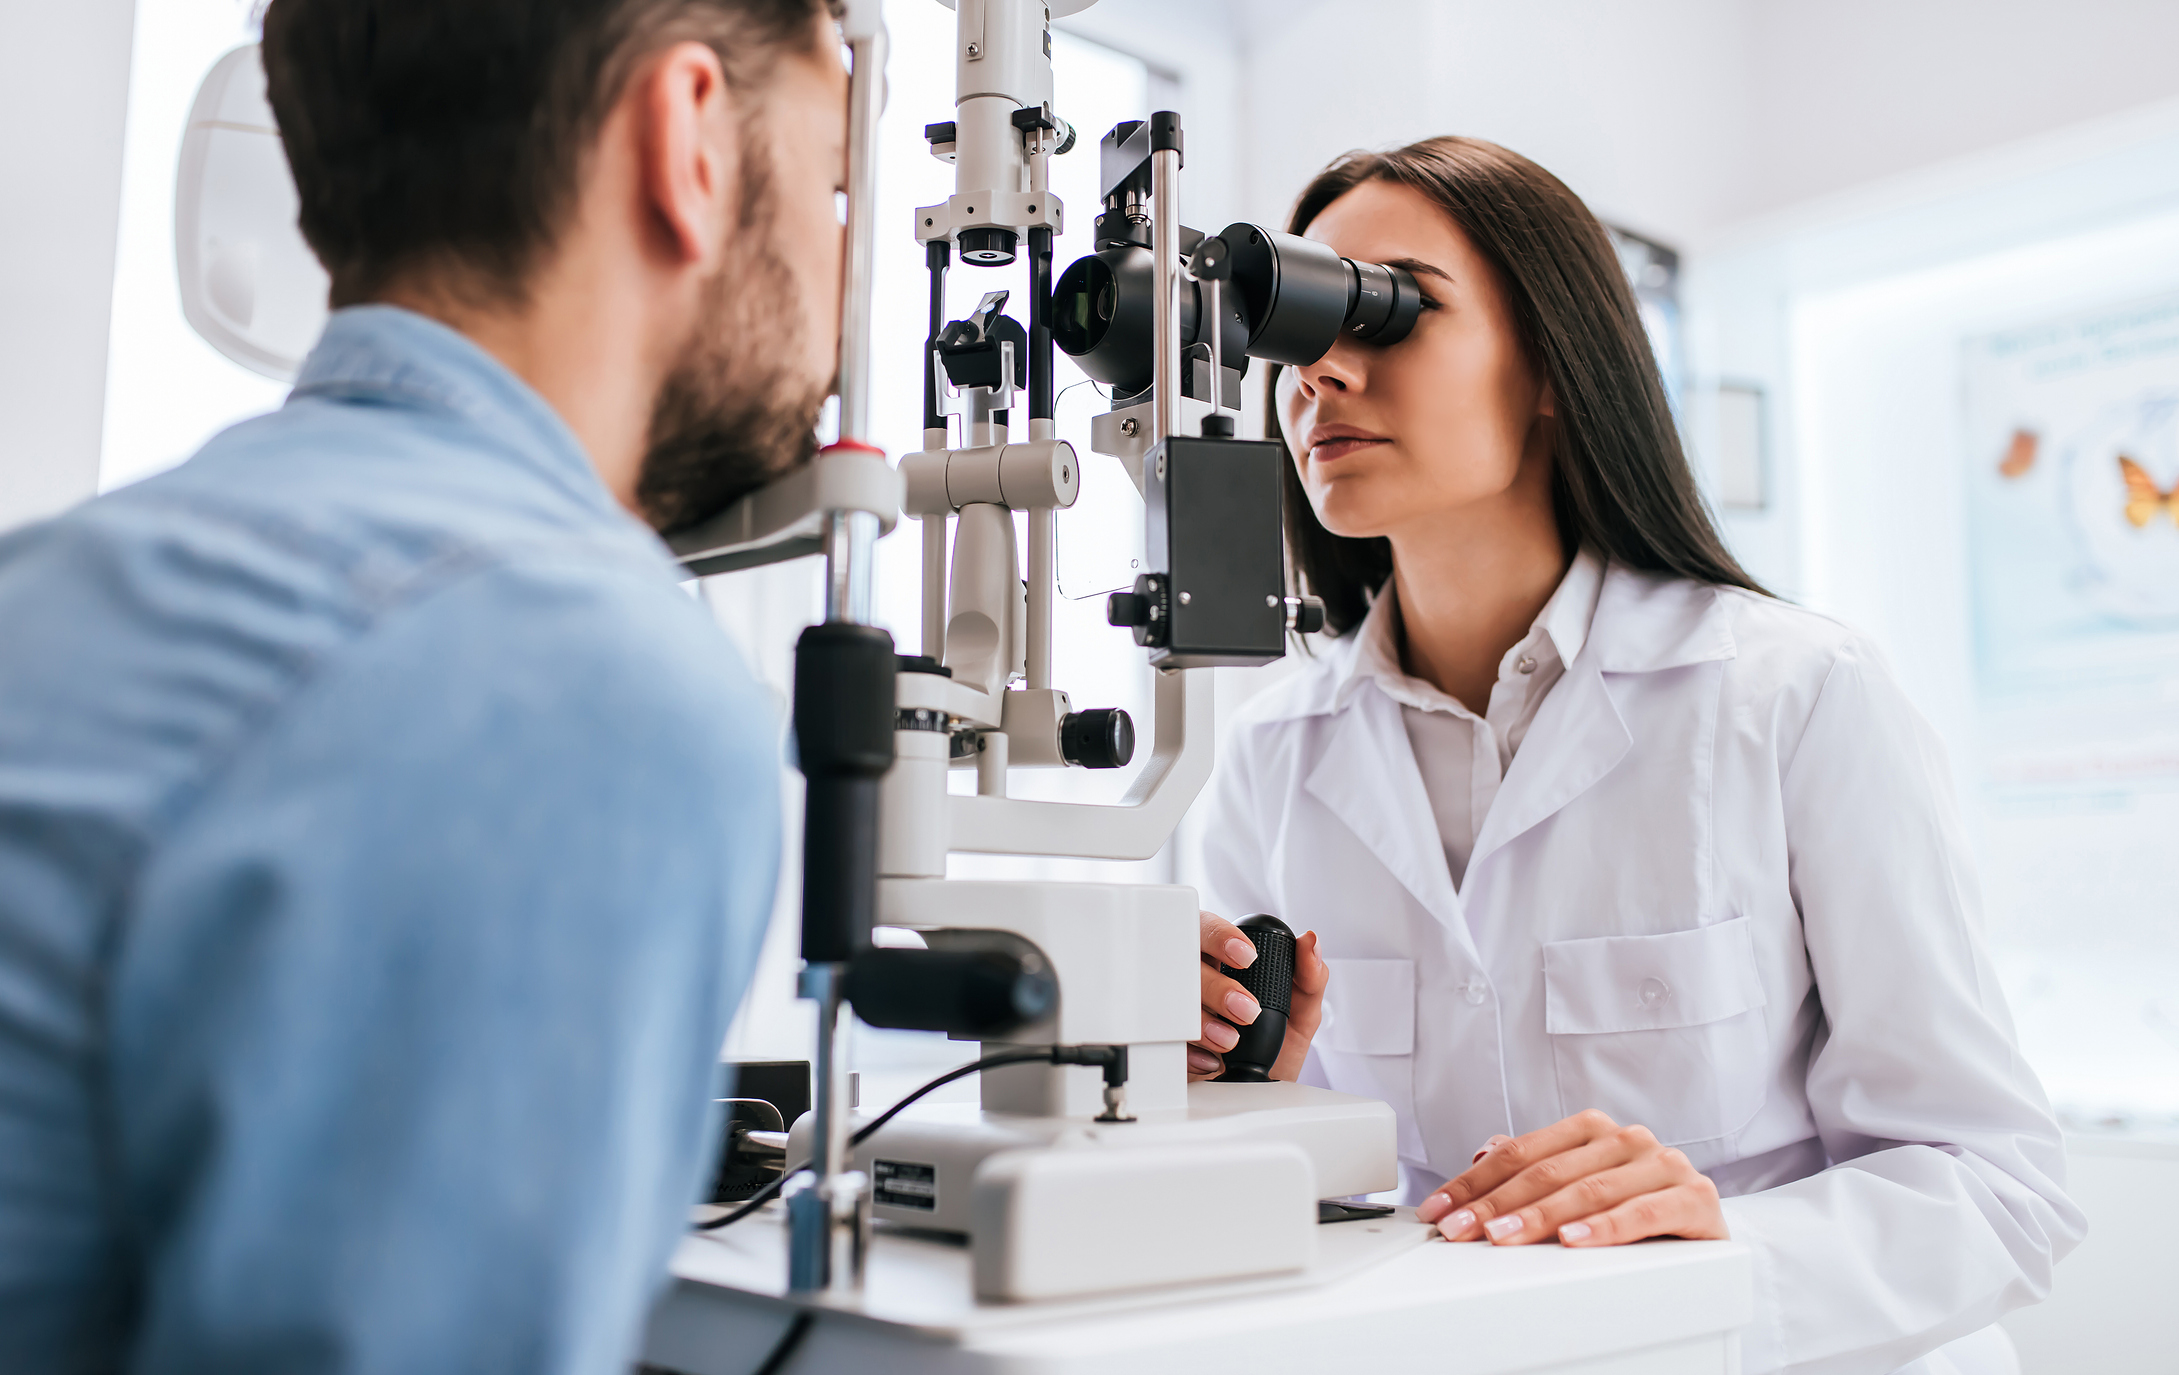 How to Become An Optometrist: Training, Licensing, and Certification Requirements